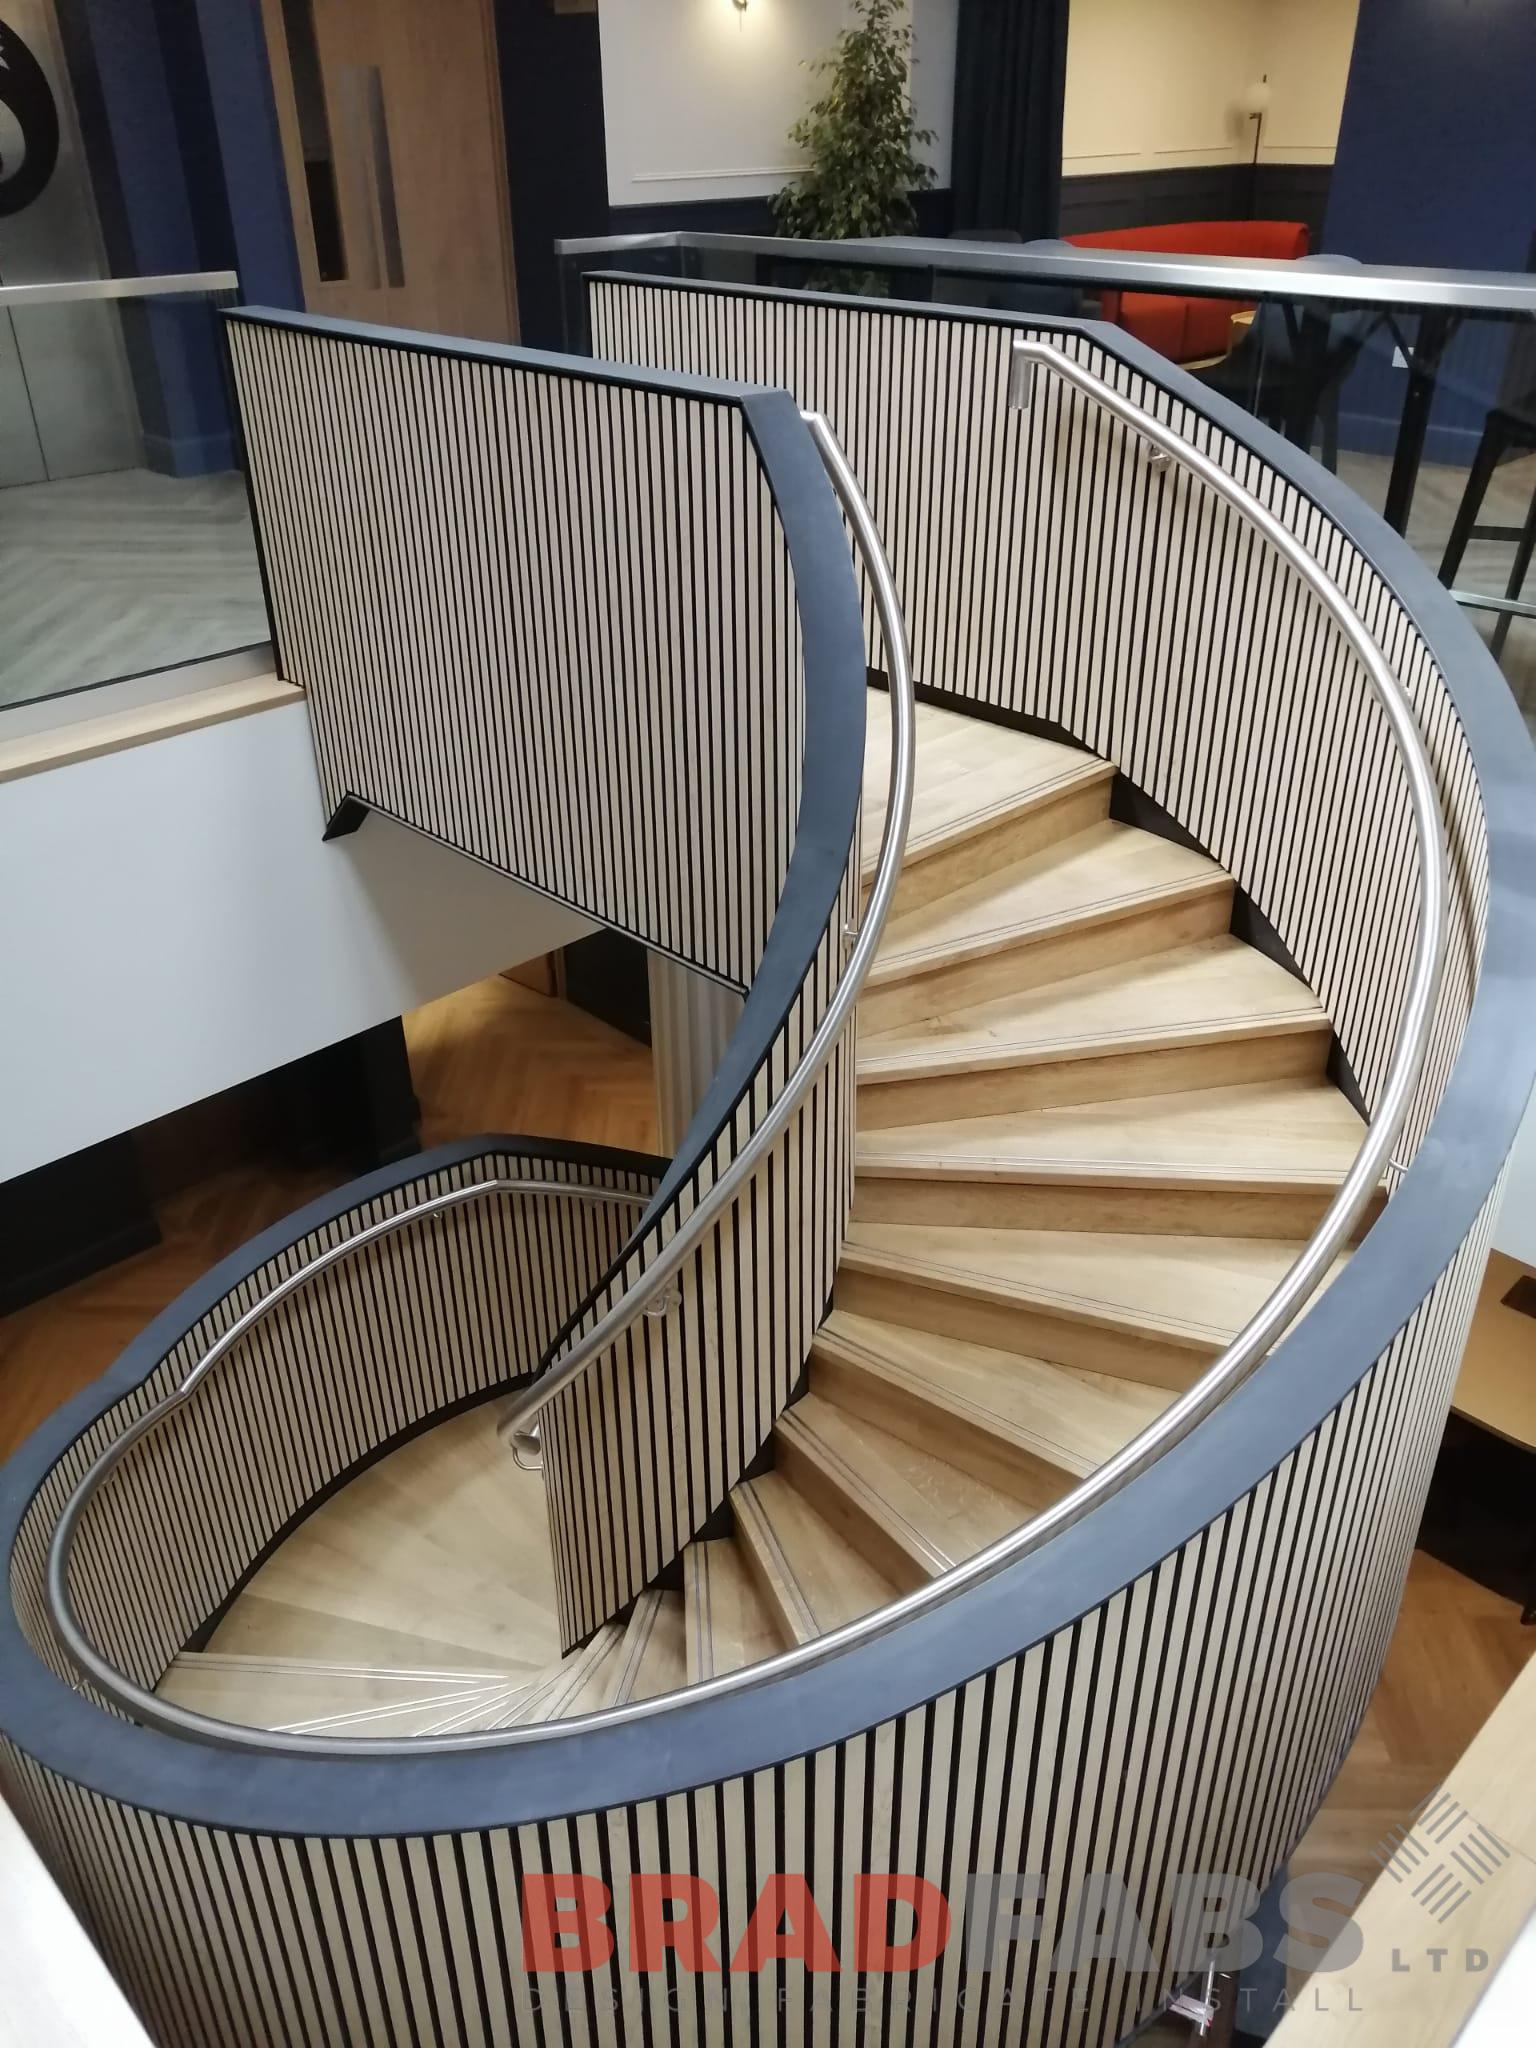 Helix stair, helical internal stair designed supplied and installed by bradfabs 